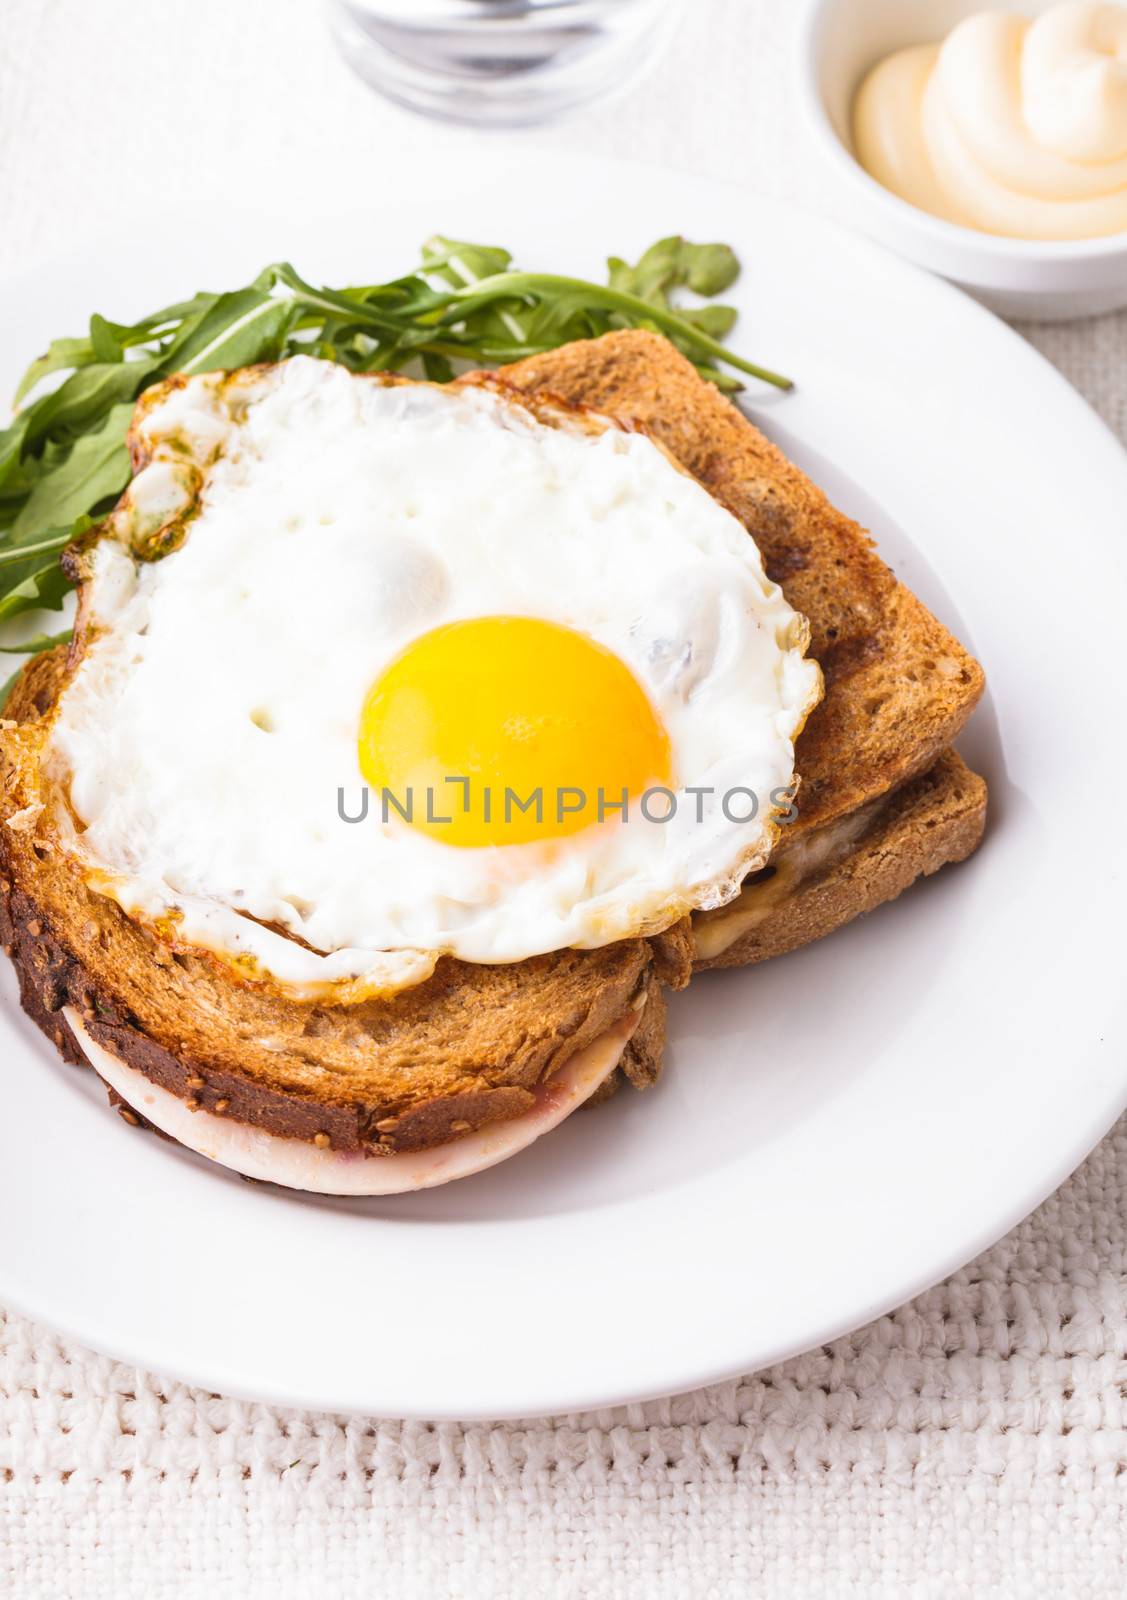 Croque Madame - sandwich with ham, cheese and fried egg